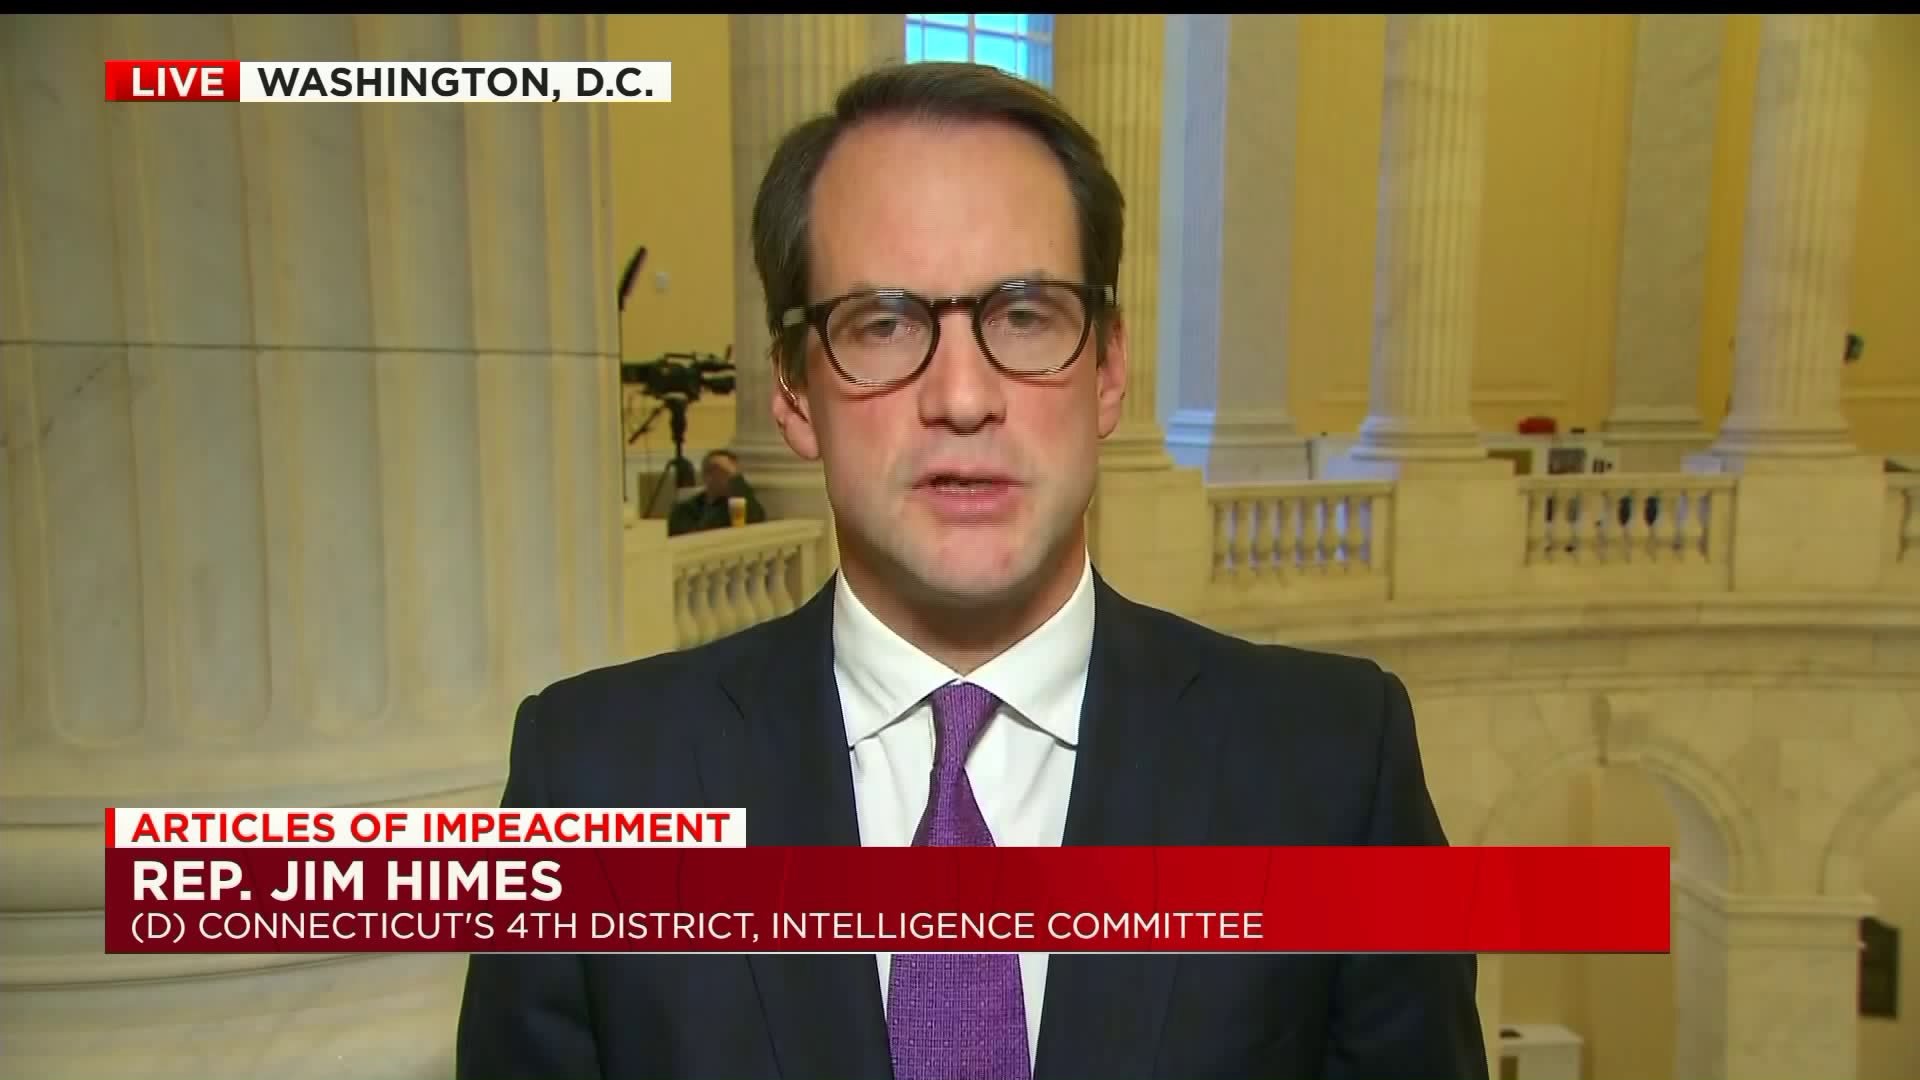 Rep. Jim Himes discuses the impeachment hearings